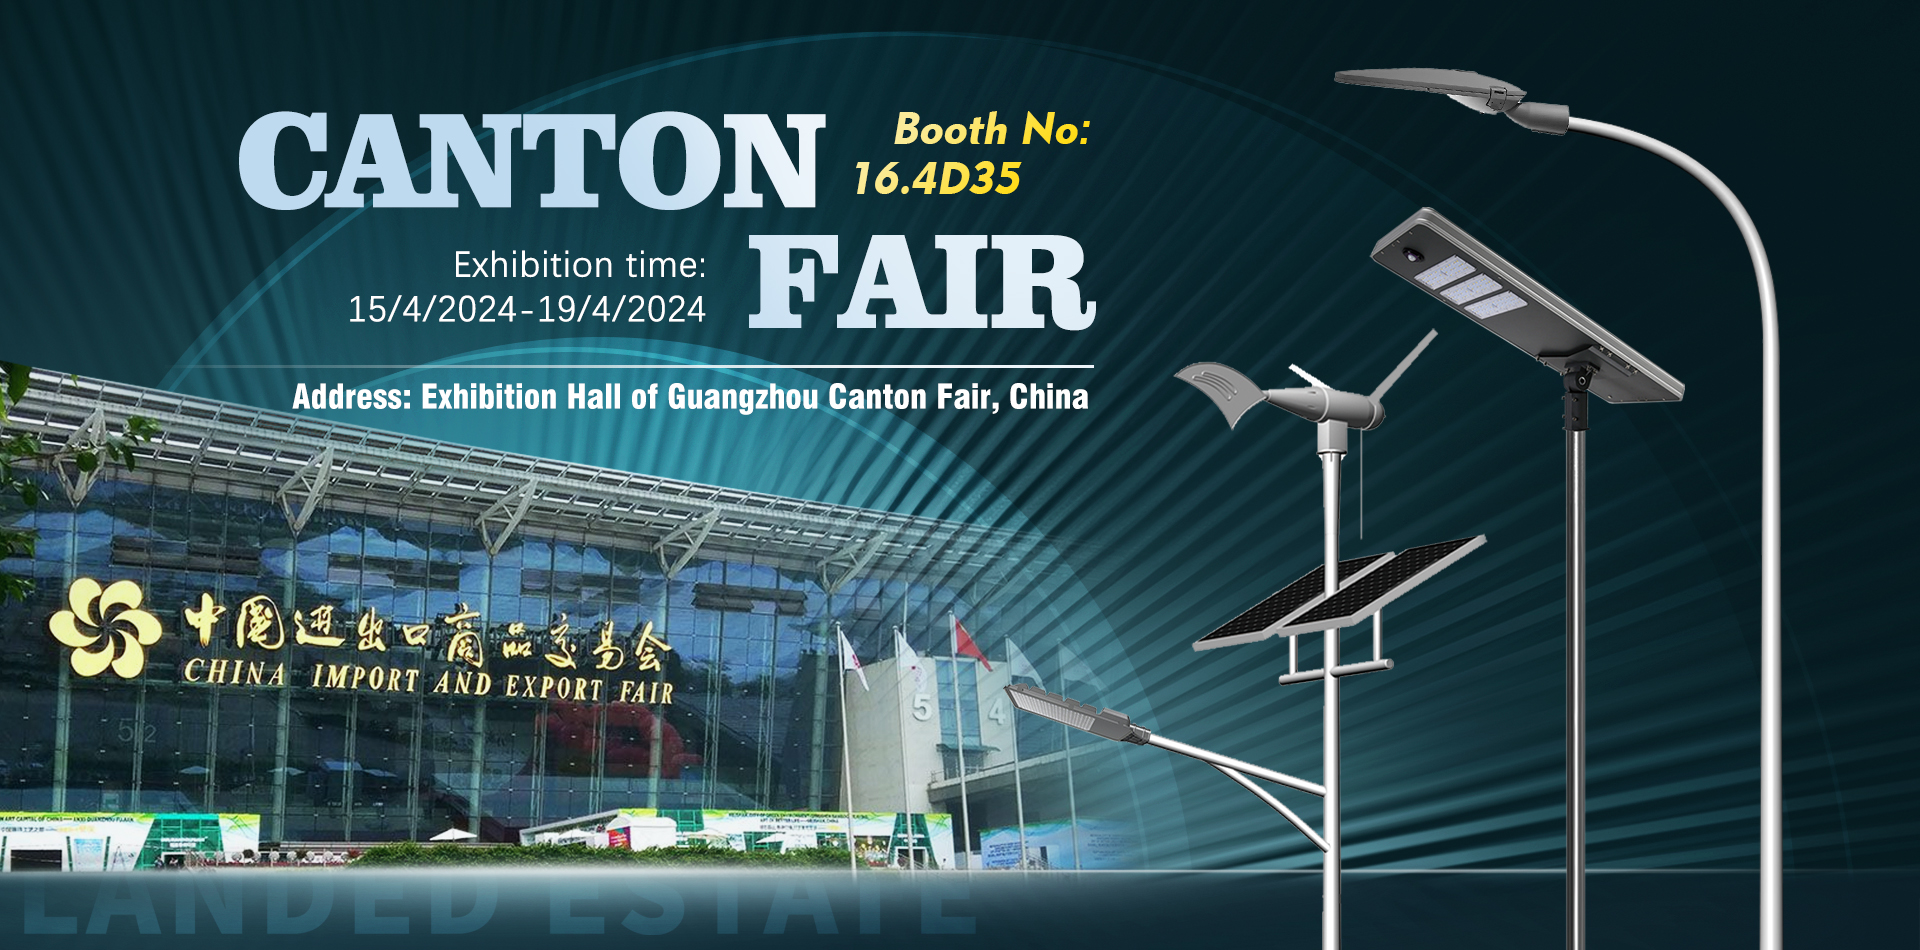 TIANXIANG will display the latest galvanized pole at Canton Fair